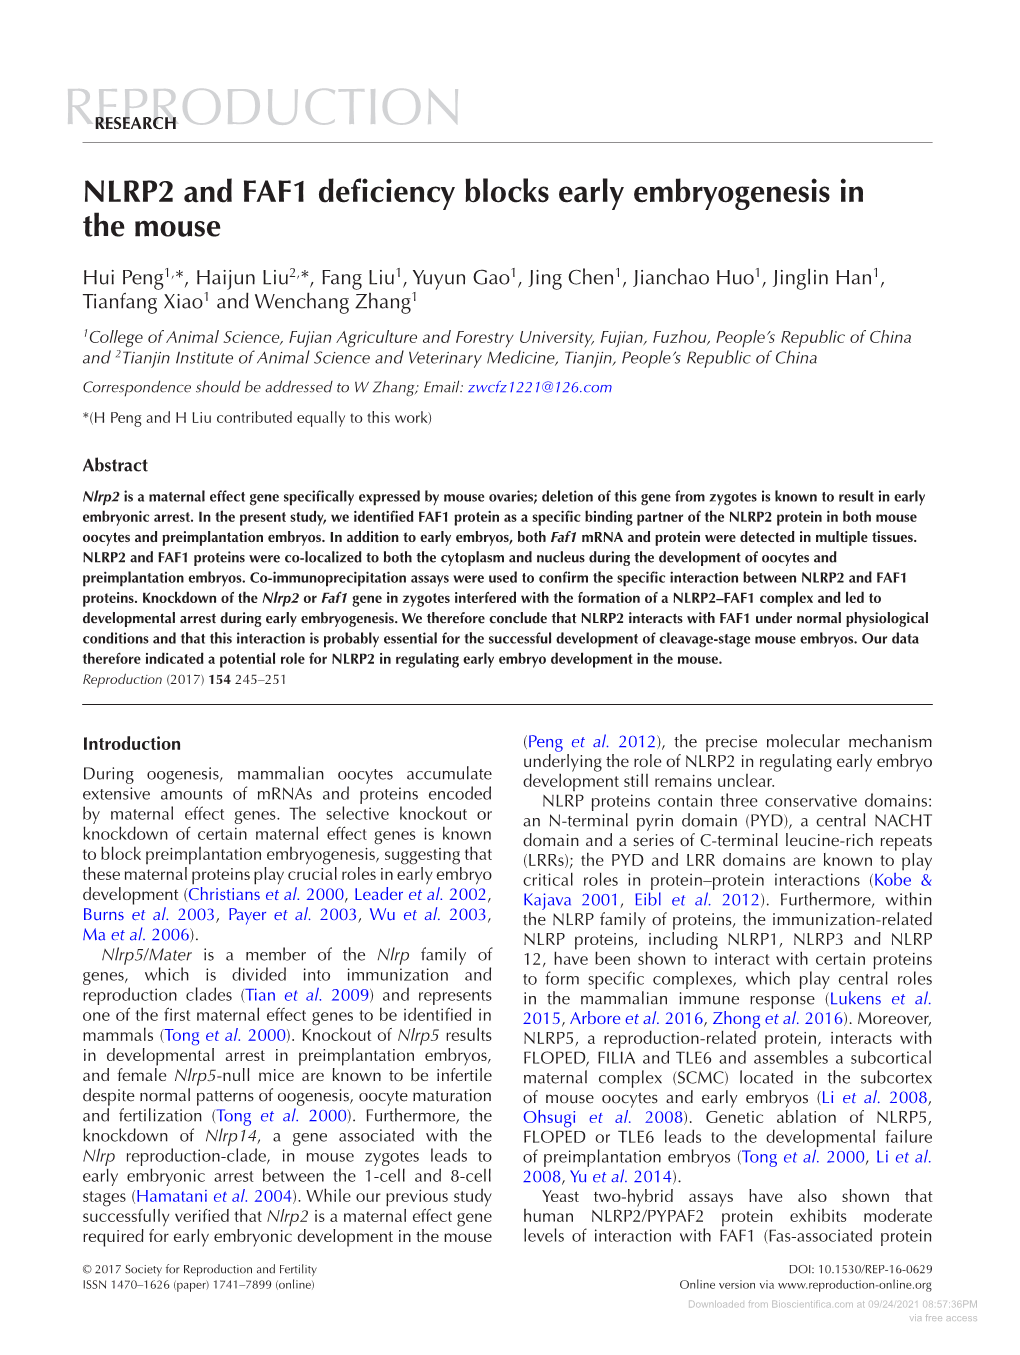 NLRP2 and FAF1 Deficiency Blocks Early Embryogenesis in the Mouse